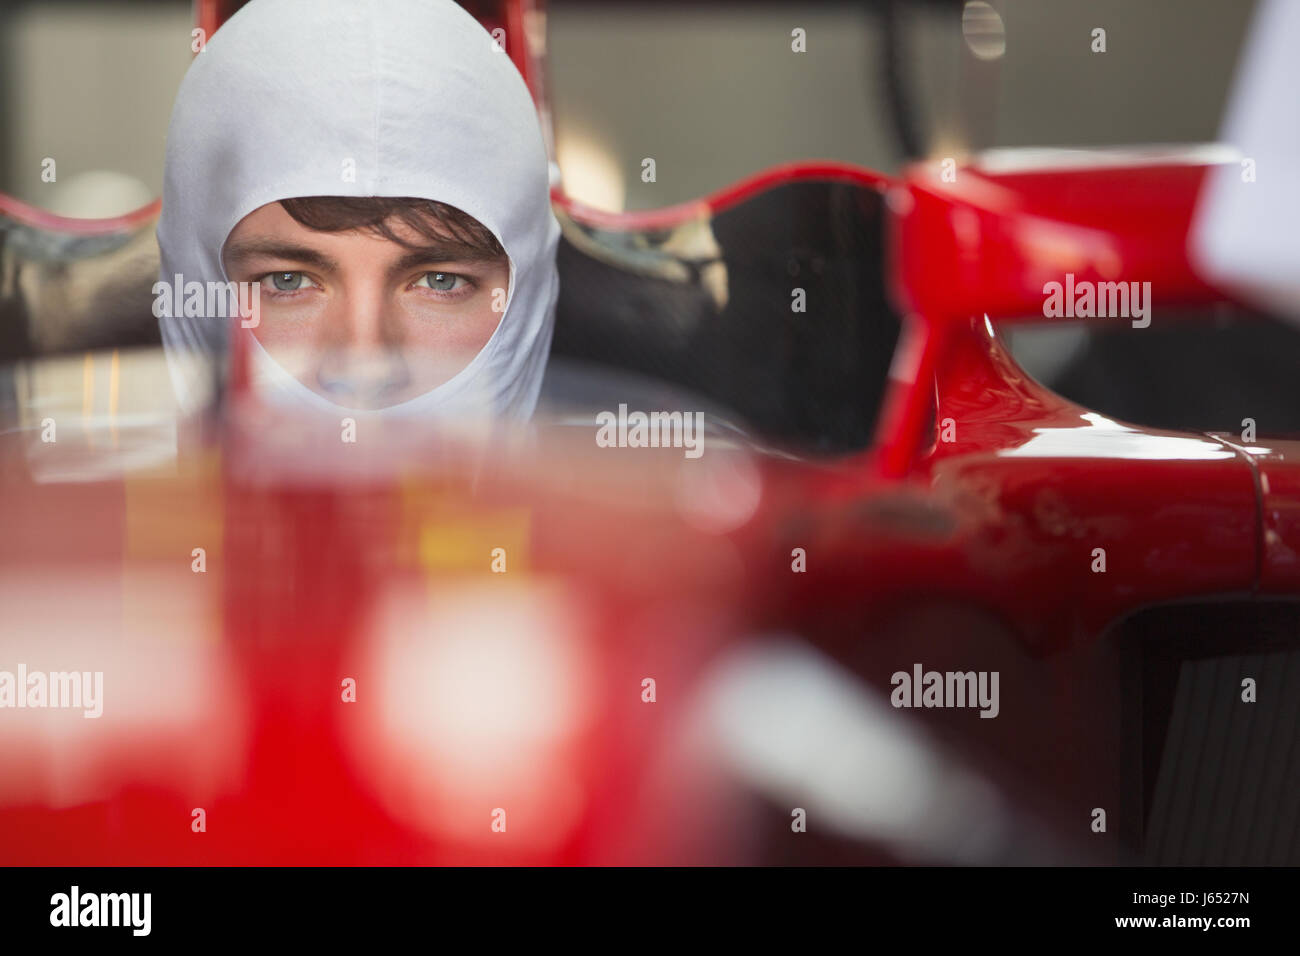 Close up portrait serious formula one race car driver wearing protective mask Stock Photo